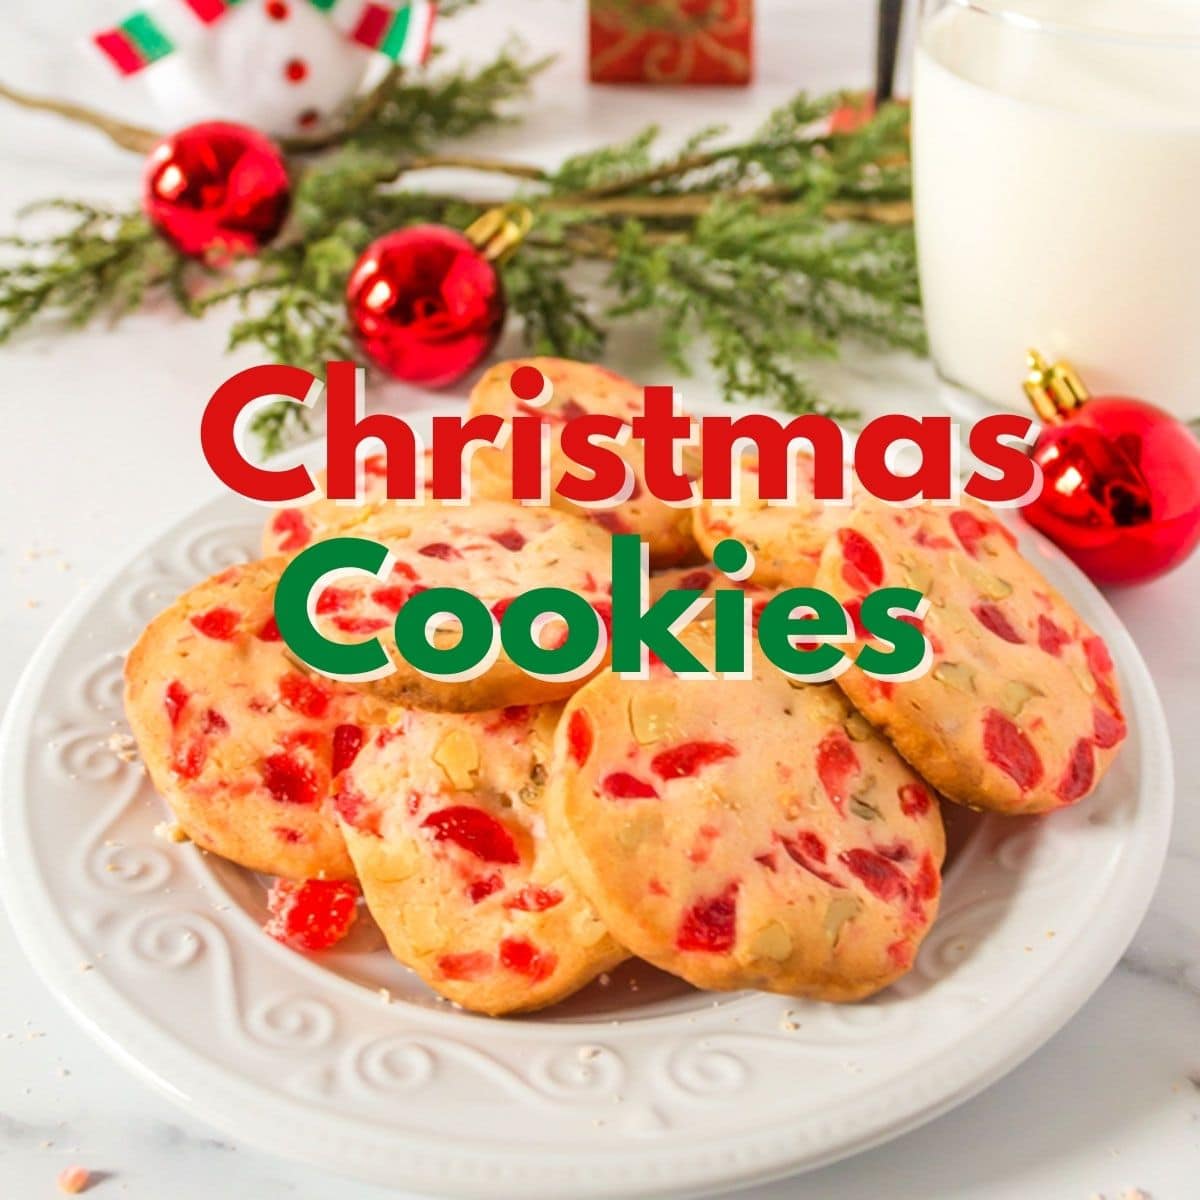 A plate of Chirstmas cookies